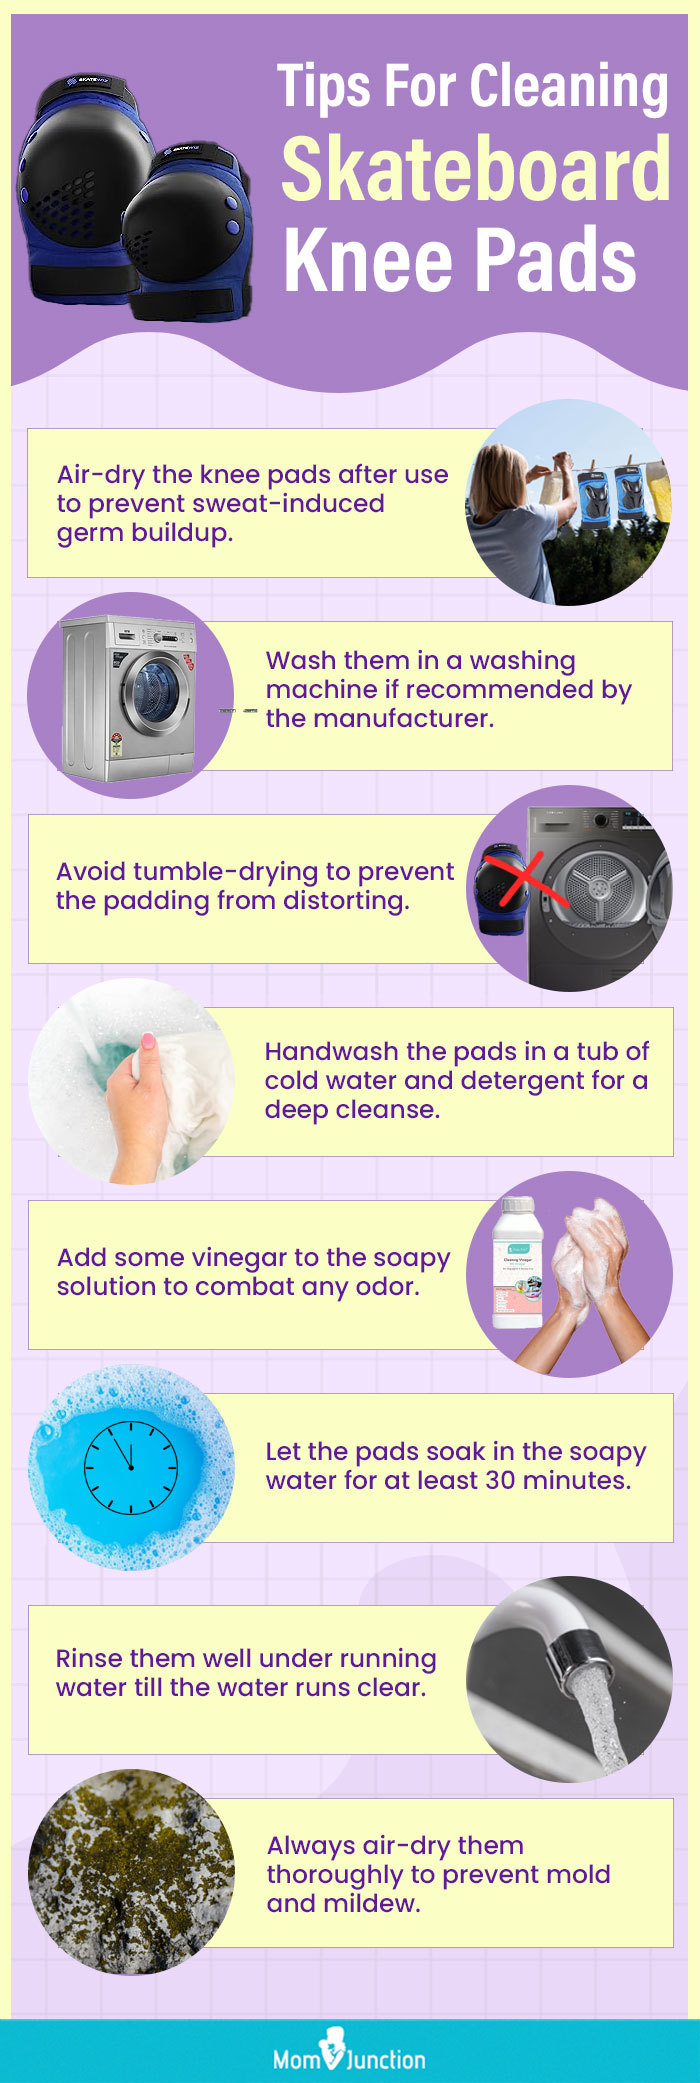 Tips For Cleaning Skateboard Knee Pads (infographic)